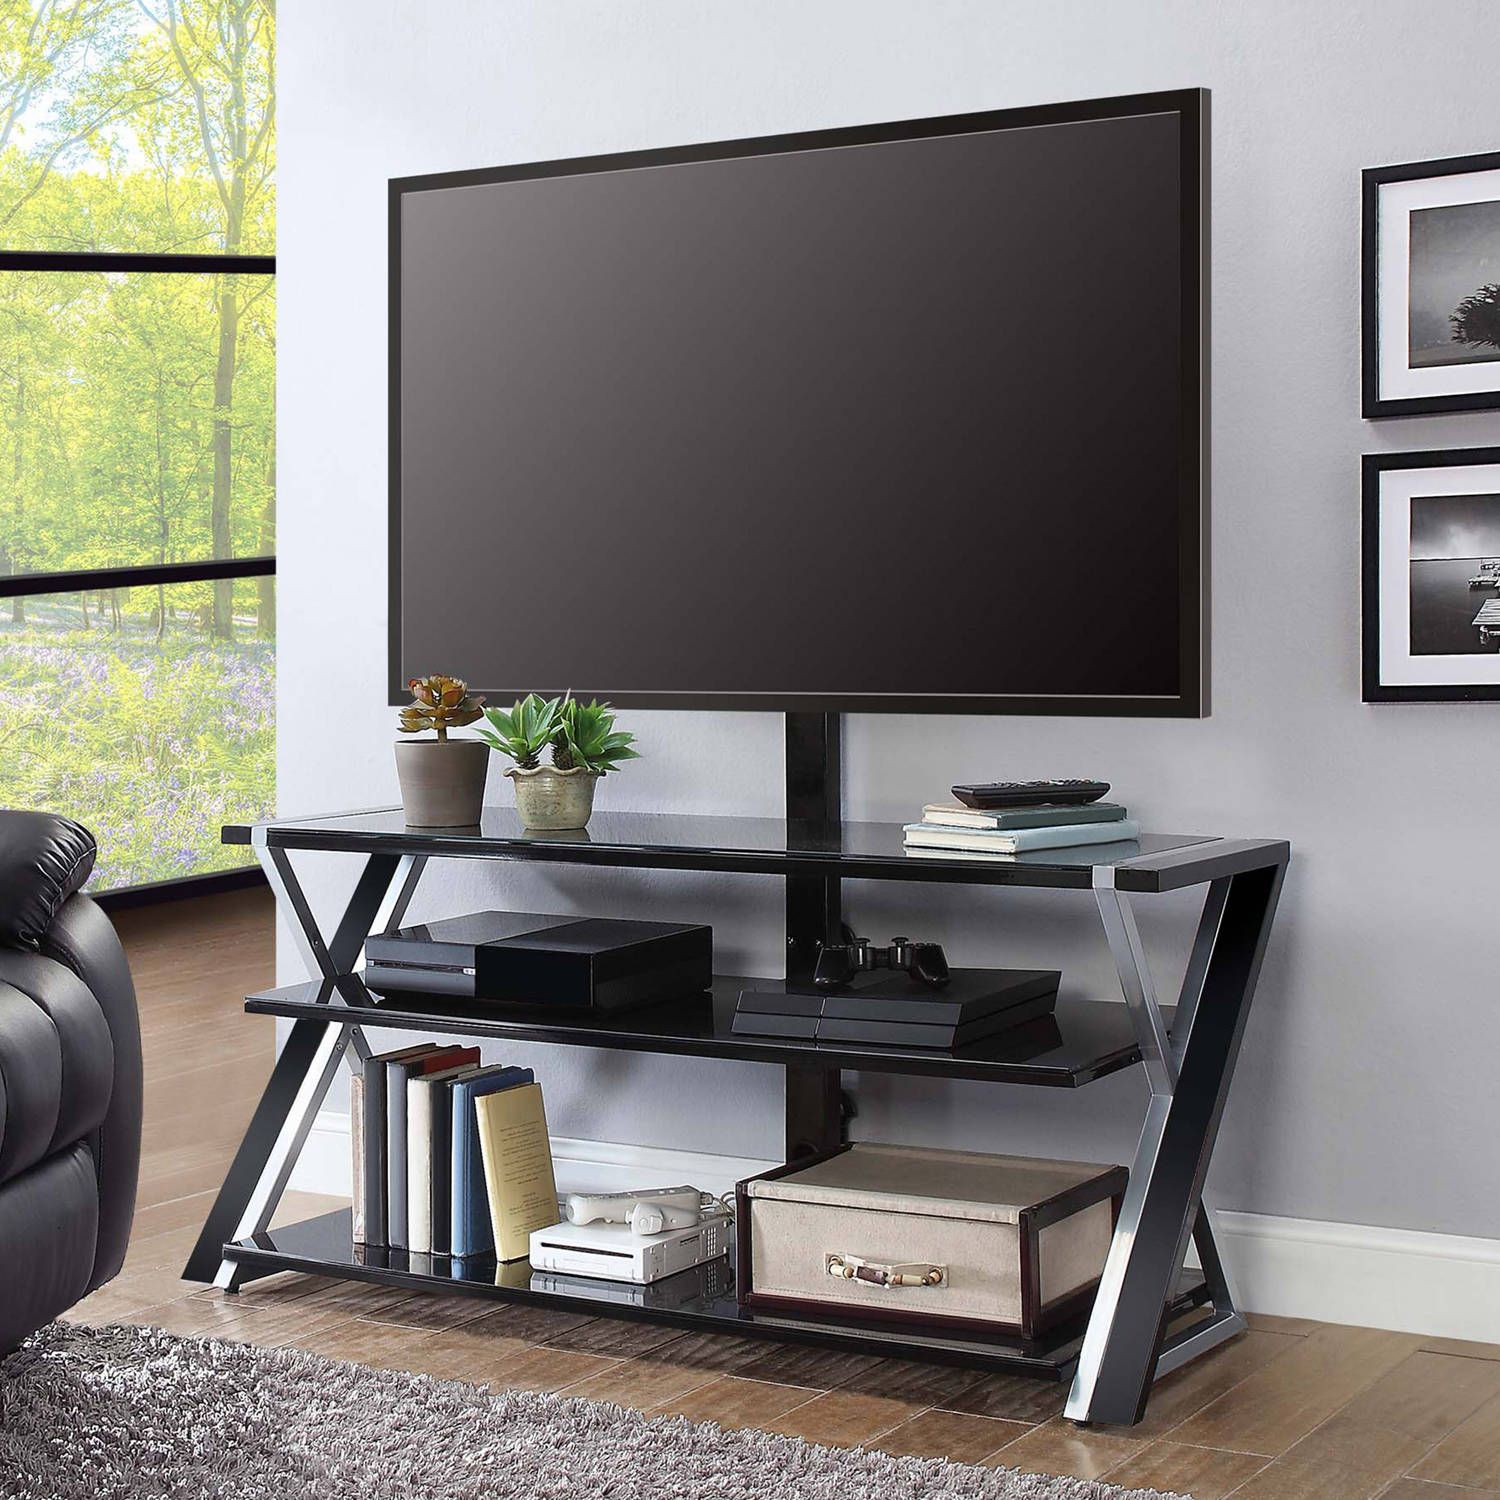 Whalen Xavier 3 In 1 Tv Stand For Tvs Up To 70", With 3 Throughout Tv Stands For 70 Inch Tvs (View 10 of 15)